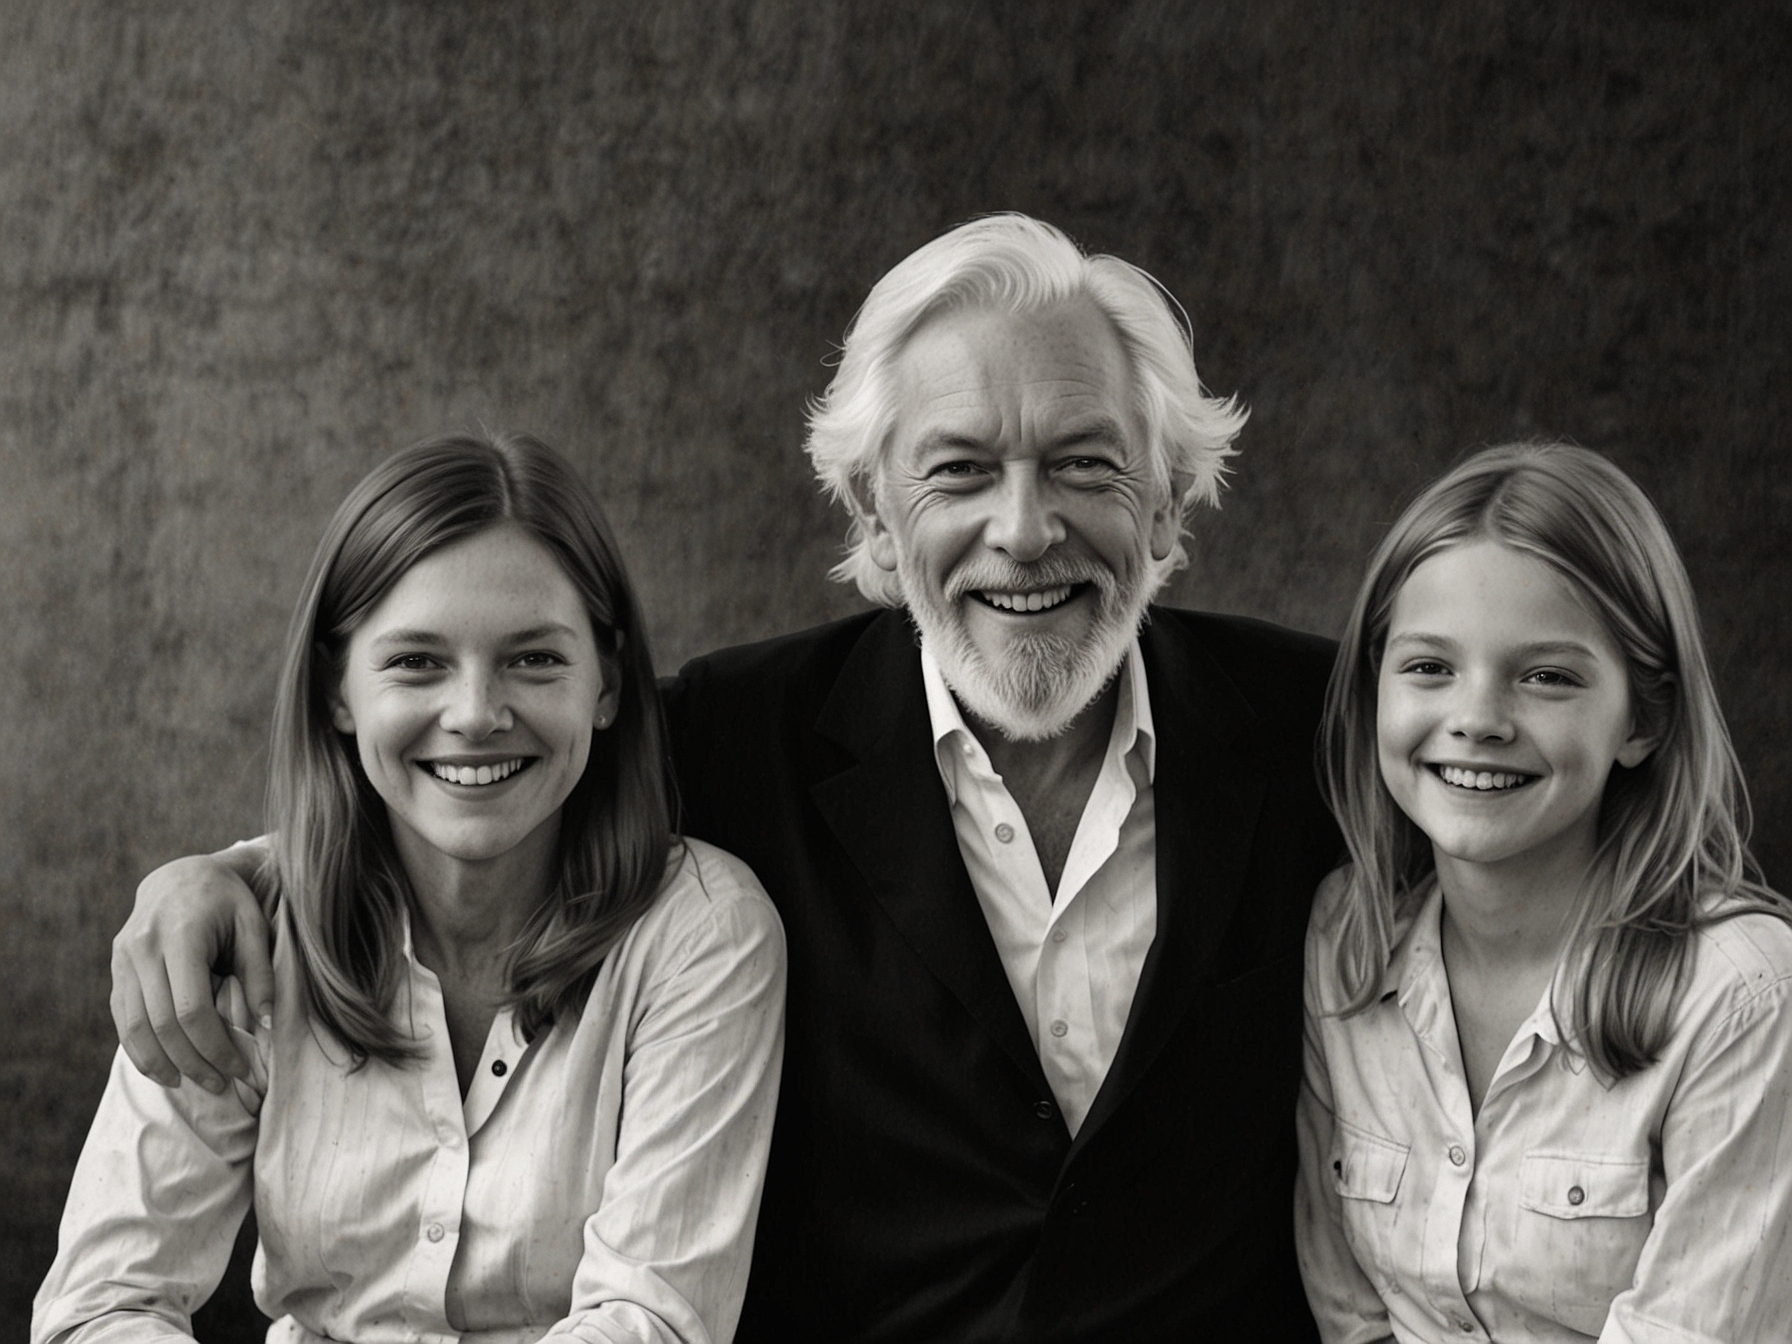 A joyful moment of Donald Sutherland with his family, highlighting the deep bonds and love that maintained his happiness and well-being amidst health challenges.